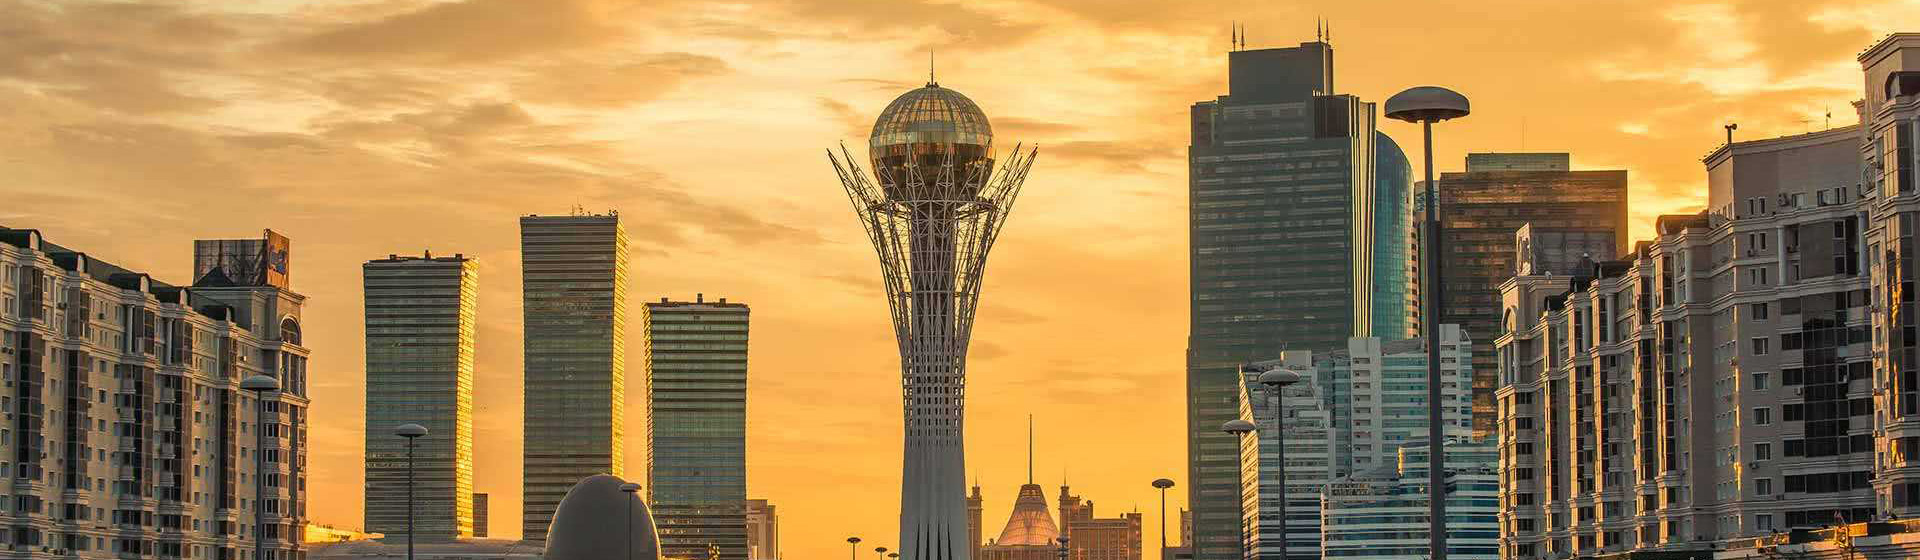 sunset draped skyline with tower containing globe on top